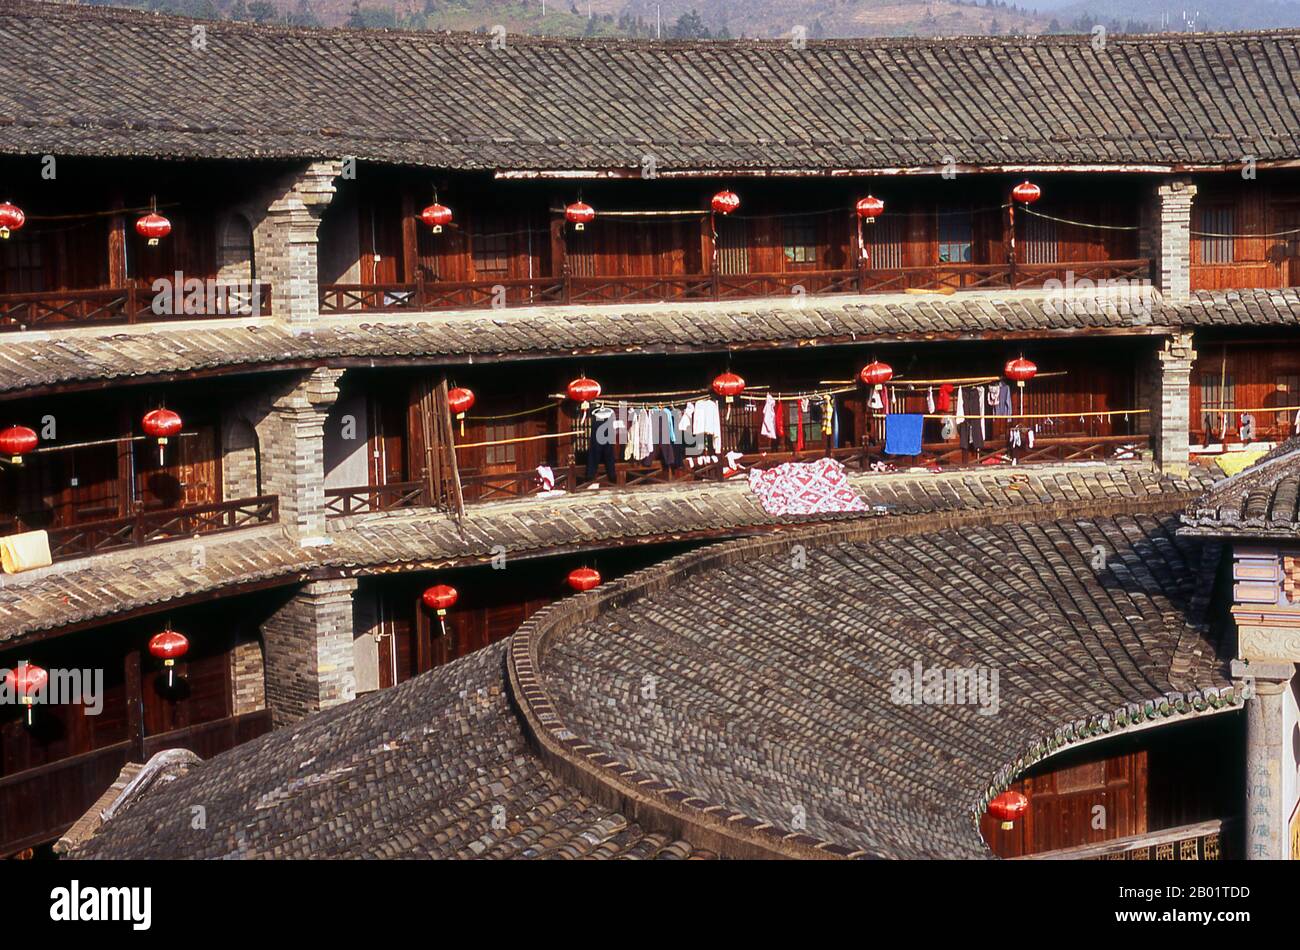 China: The inner courtyard at Zhenchang Lou Hakka Tower near Hukeng, Yongding County, Fujian Province.  The Hakka (Kejia in Mandarin; literally 'guest people') are Han Chinese who speak the Hakka language. Their distinctive earthen houses or tulou can be found in the borderland counties where Guangdong, Jiangxi and Fujian provinces meet.  Communal entities, tulou are fortified against marauding bandits and generally made of compacted earth, bamboo, wood and stone. They contain many rooms on several storeys, so that several families can live together. Stock Photo